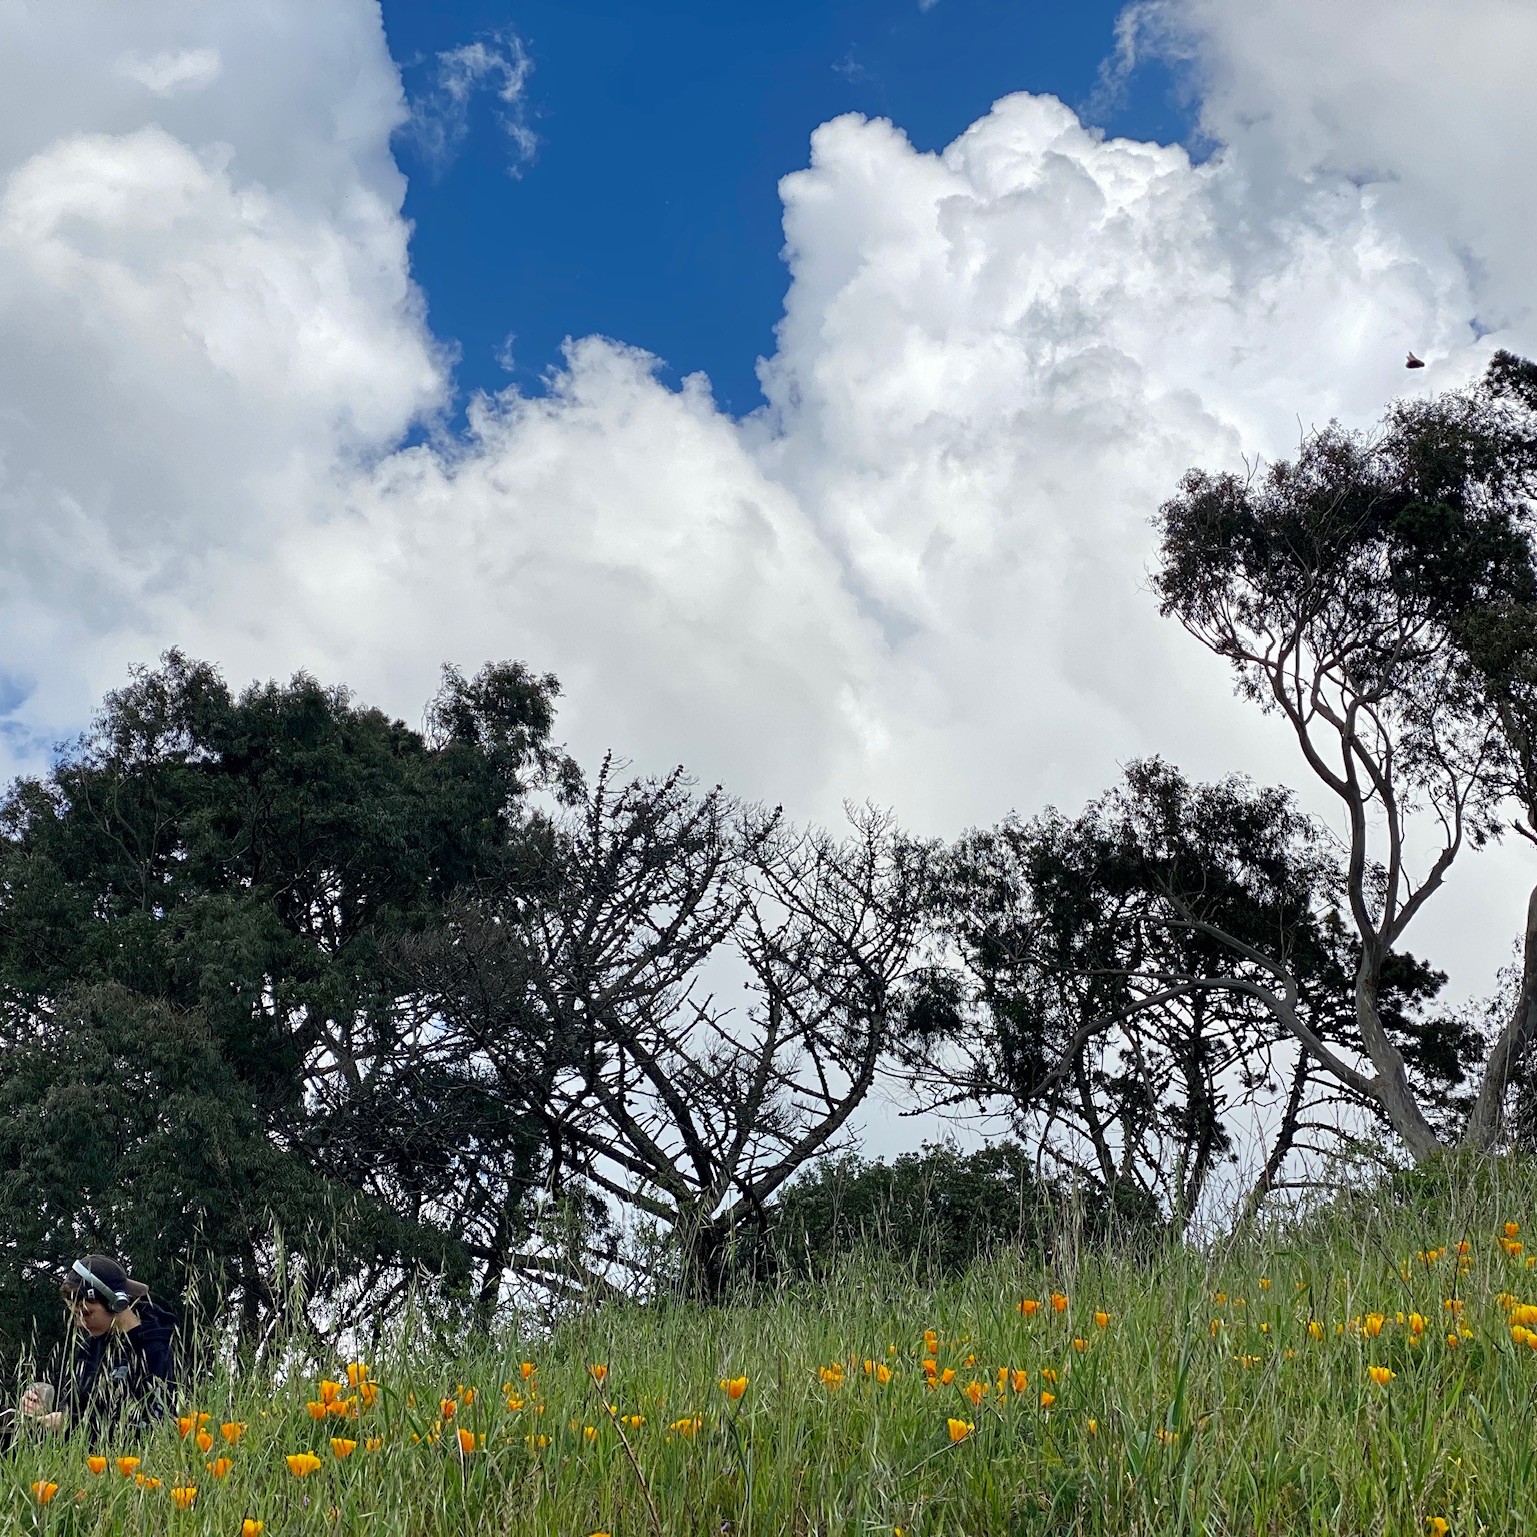 Trees on a hillside with California poppies and fluffy white clouds.